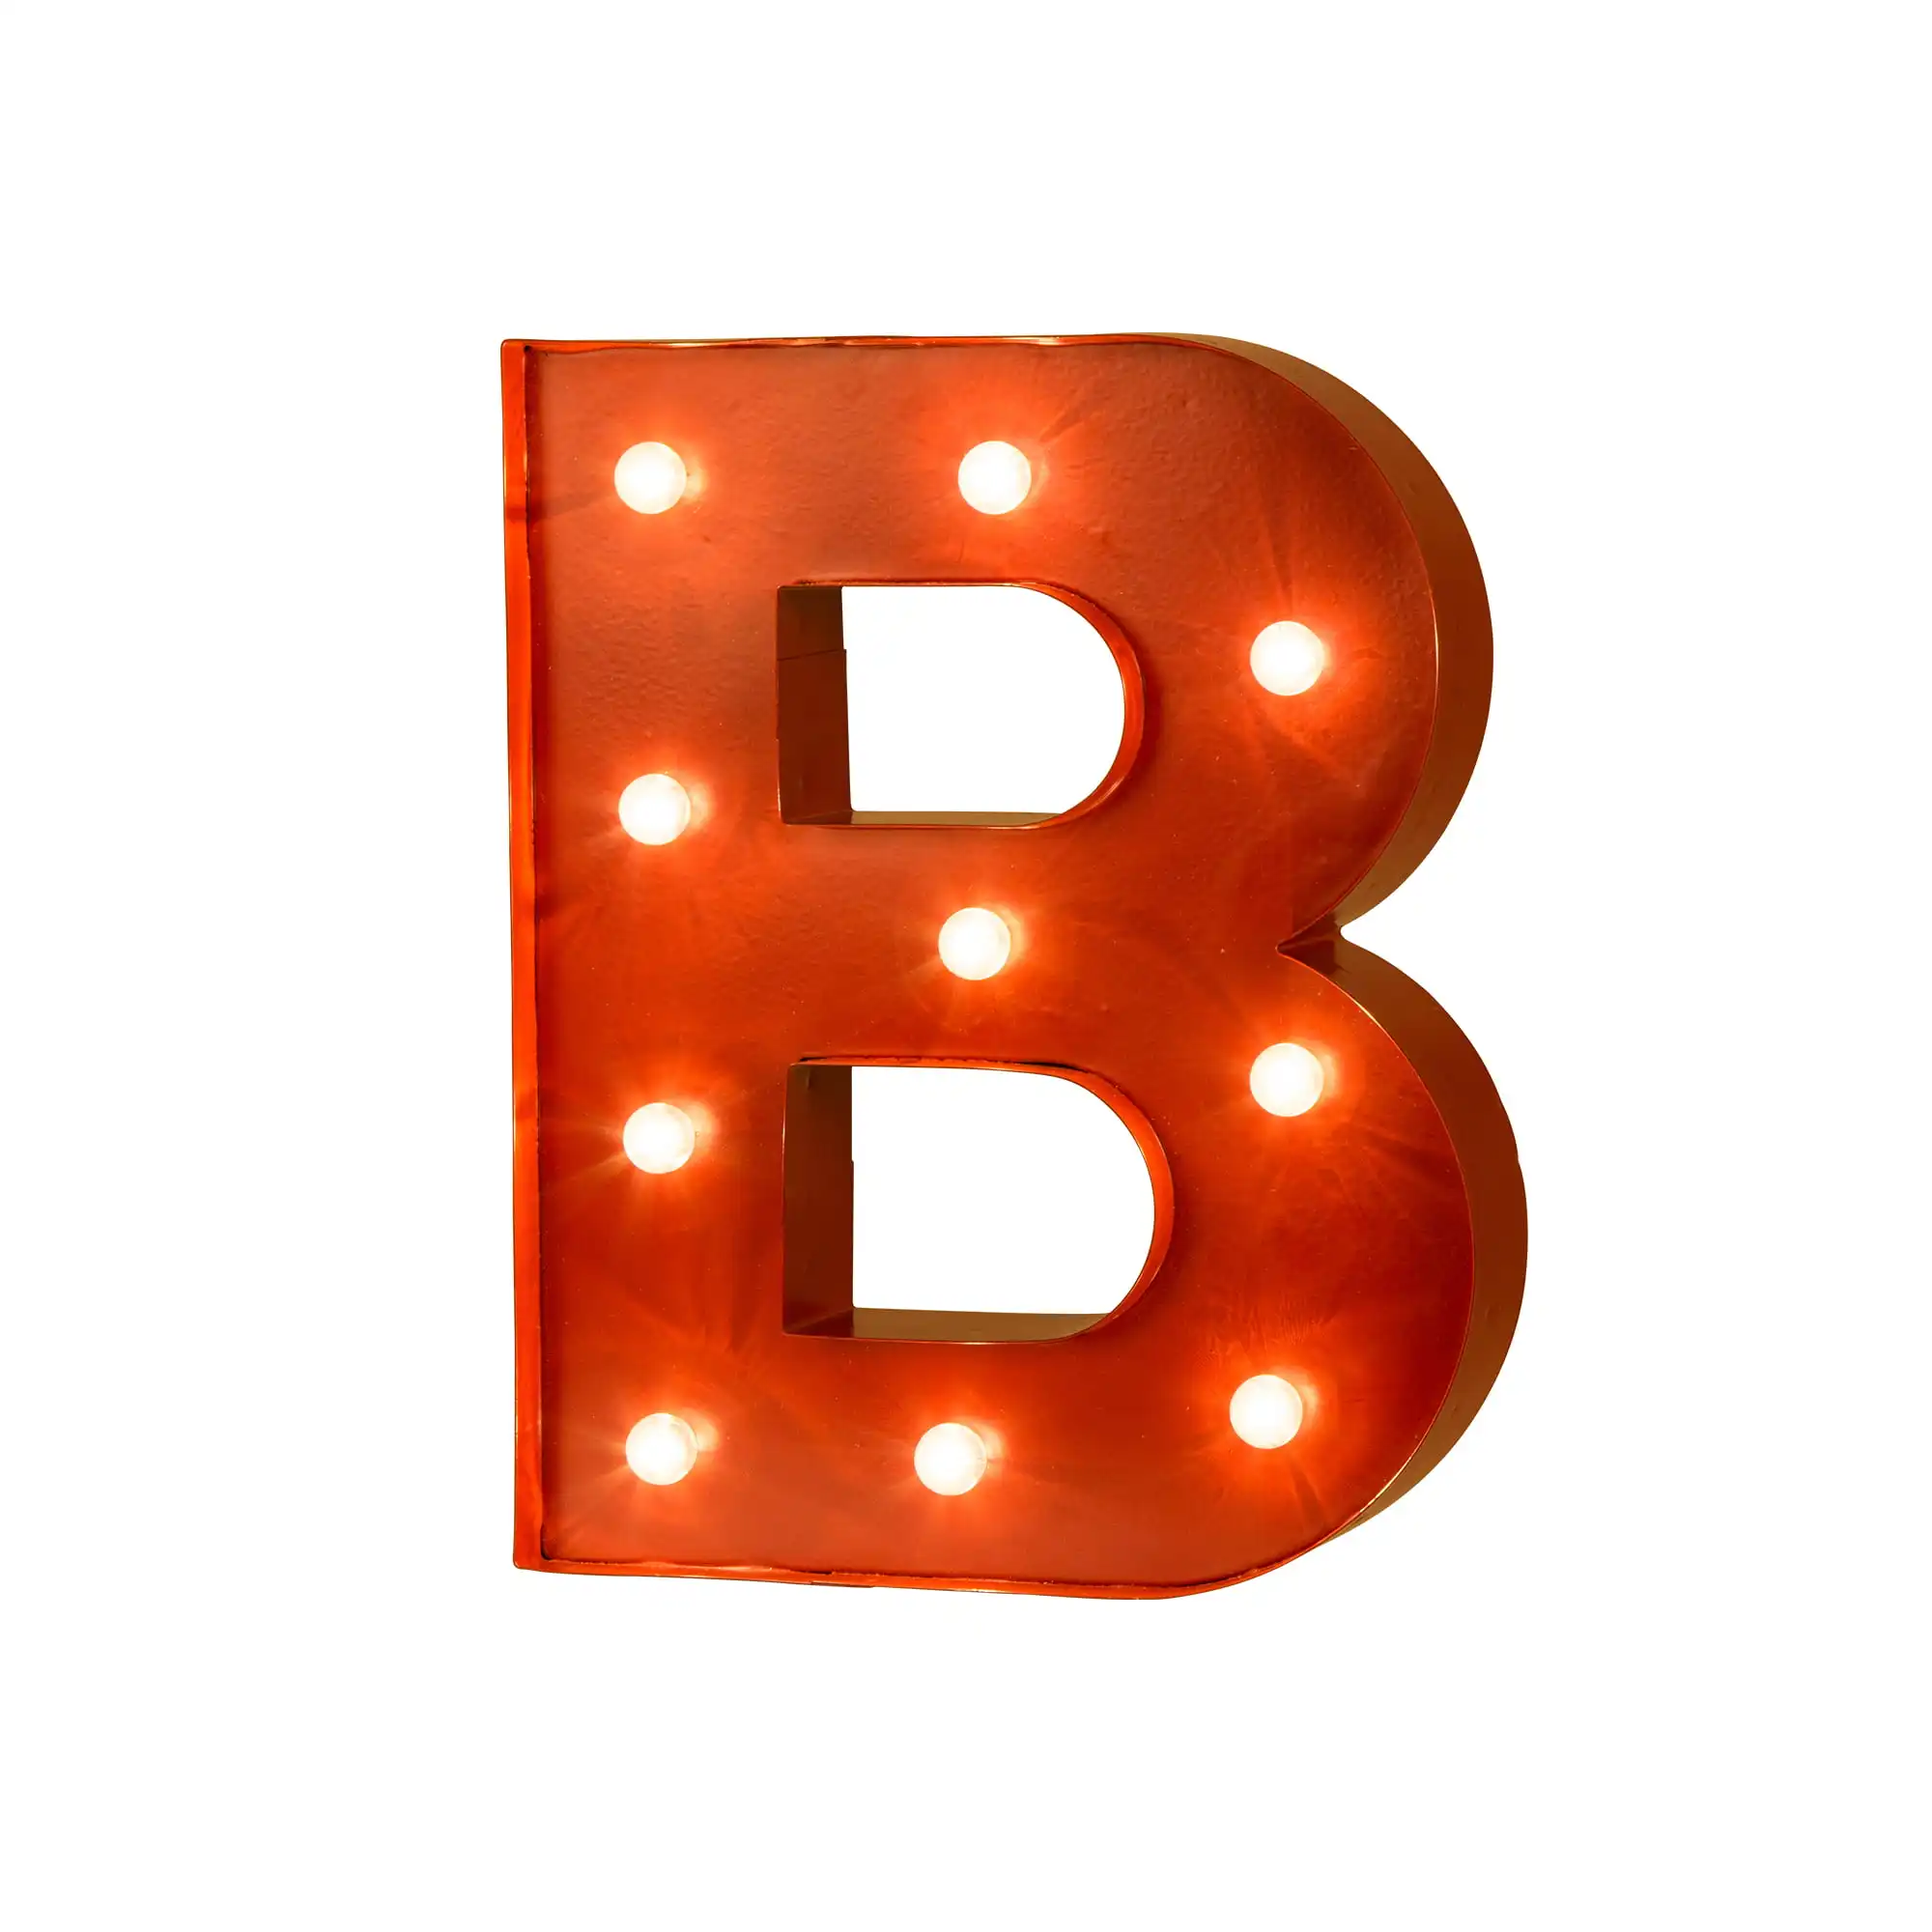 BOYANG wedding birthday party decoration led digital English letter light bulb Large vintage glowing marquee letter logo